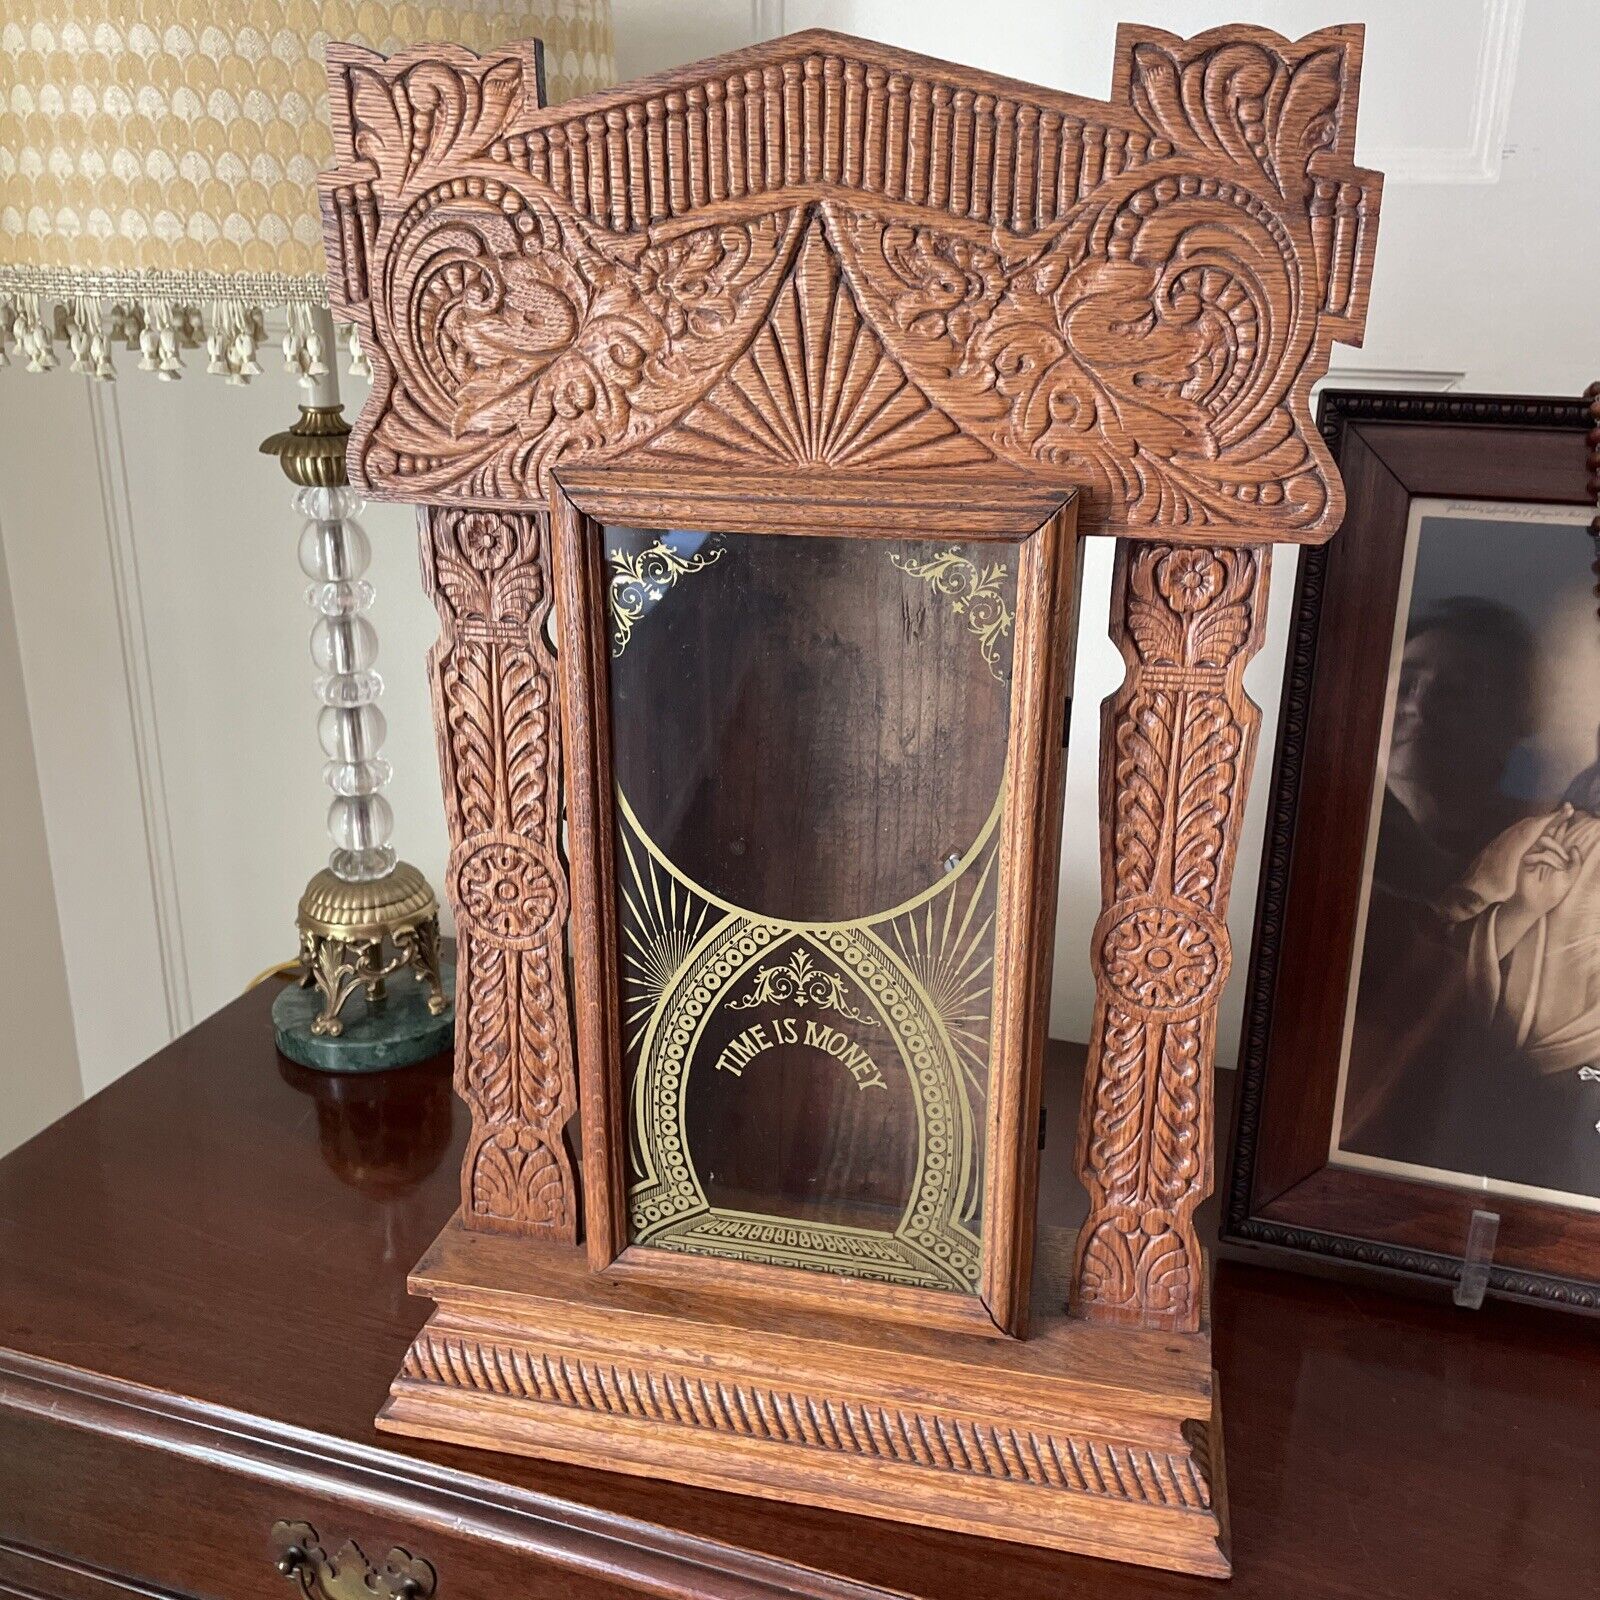 SESSIONS PARLOR CLOCK CASE “Time Is Money” RARE IMMACULATE Oak